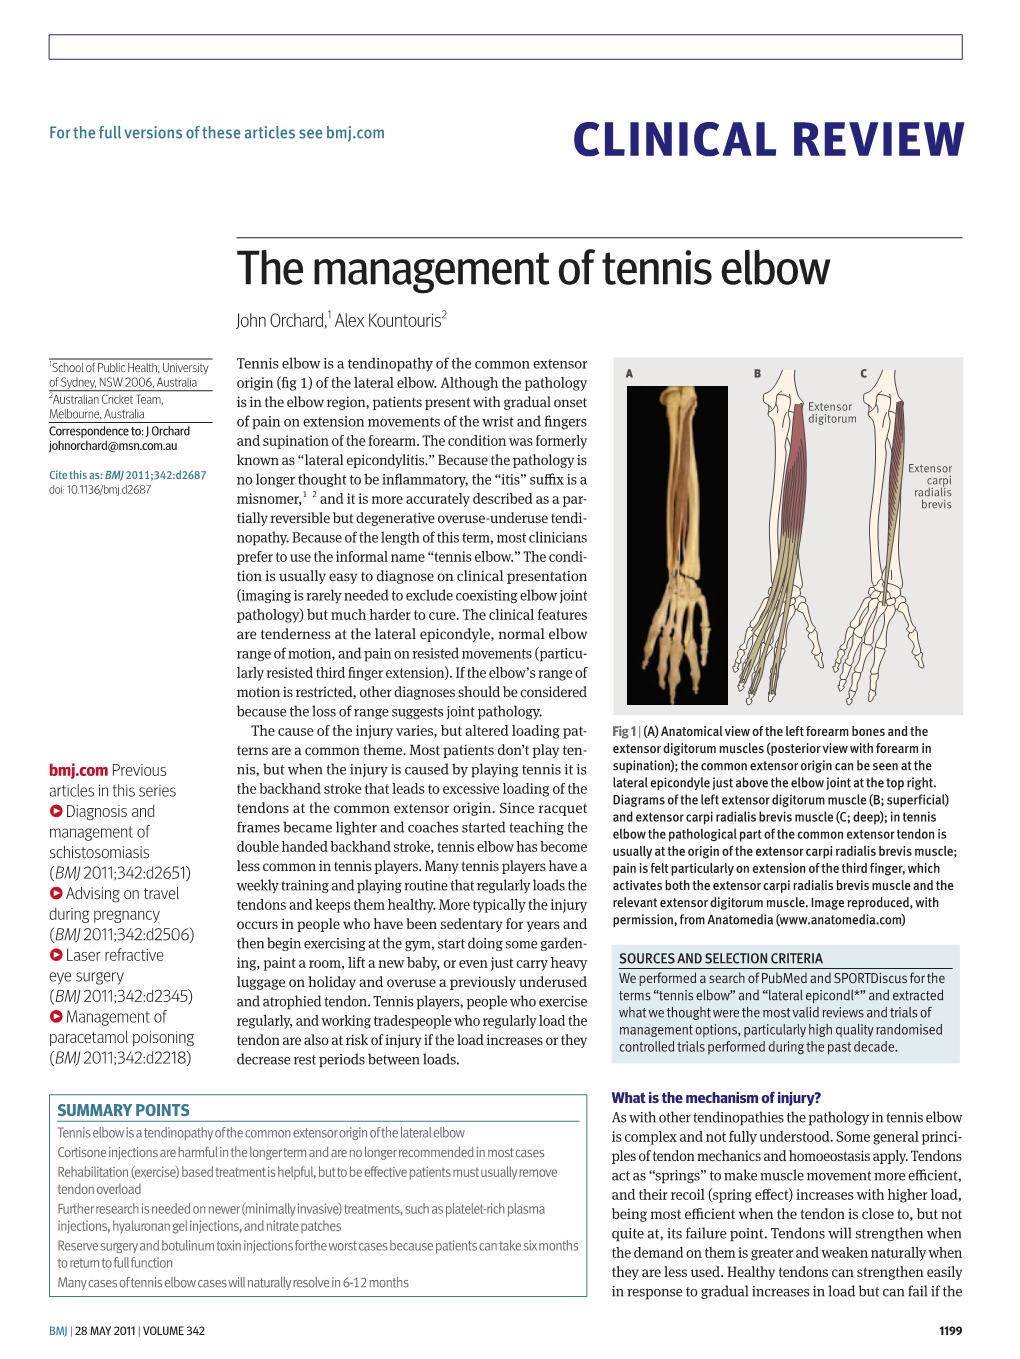 CLINICAL REVIEW the Management of Tennis Elbow